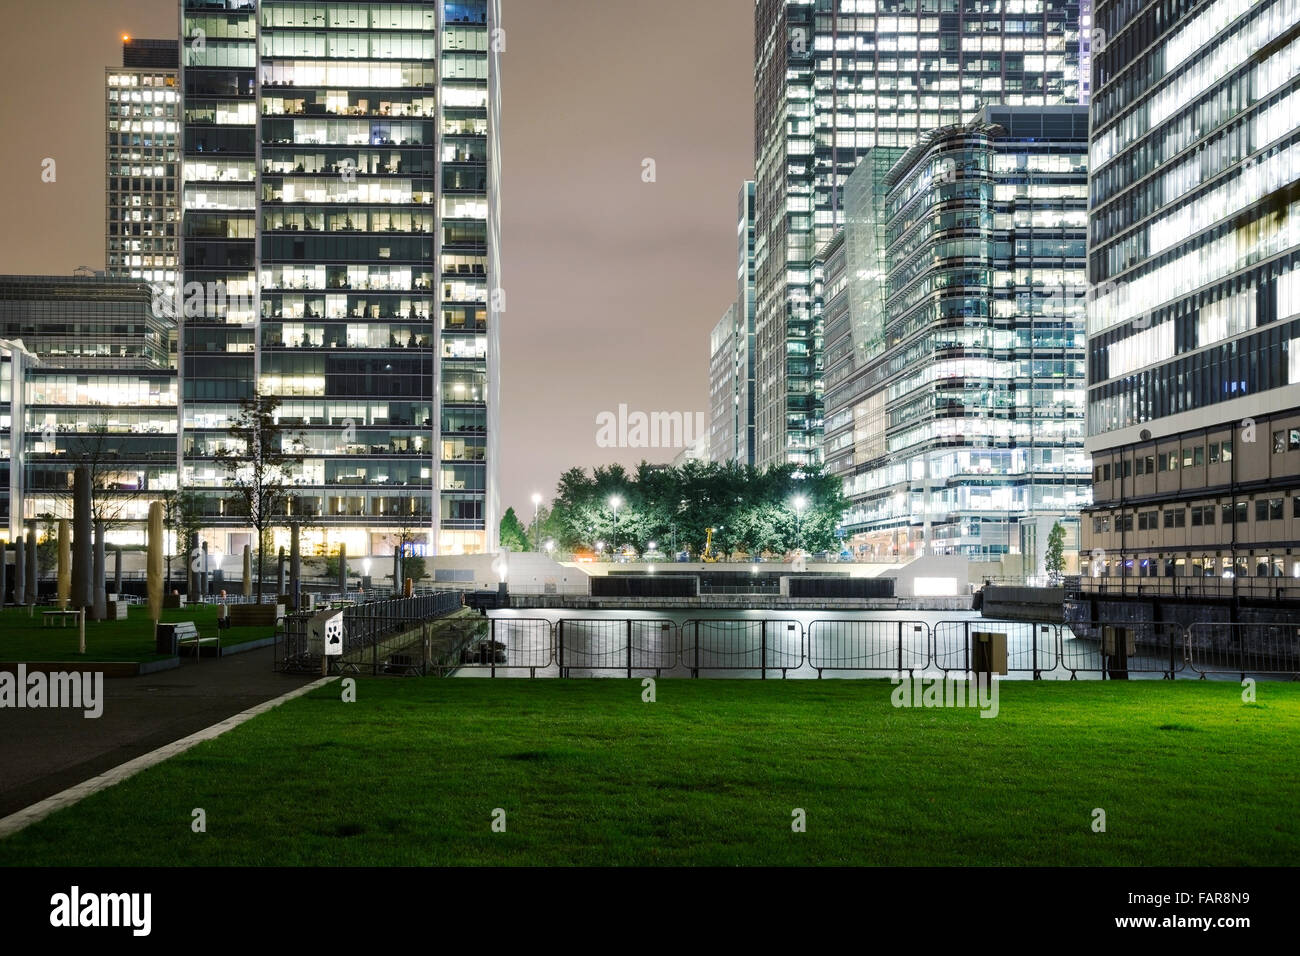 Canary Wharf offices with lights on at night time with a public park area in the foreground Stock Photo